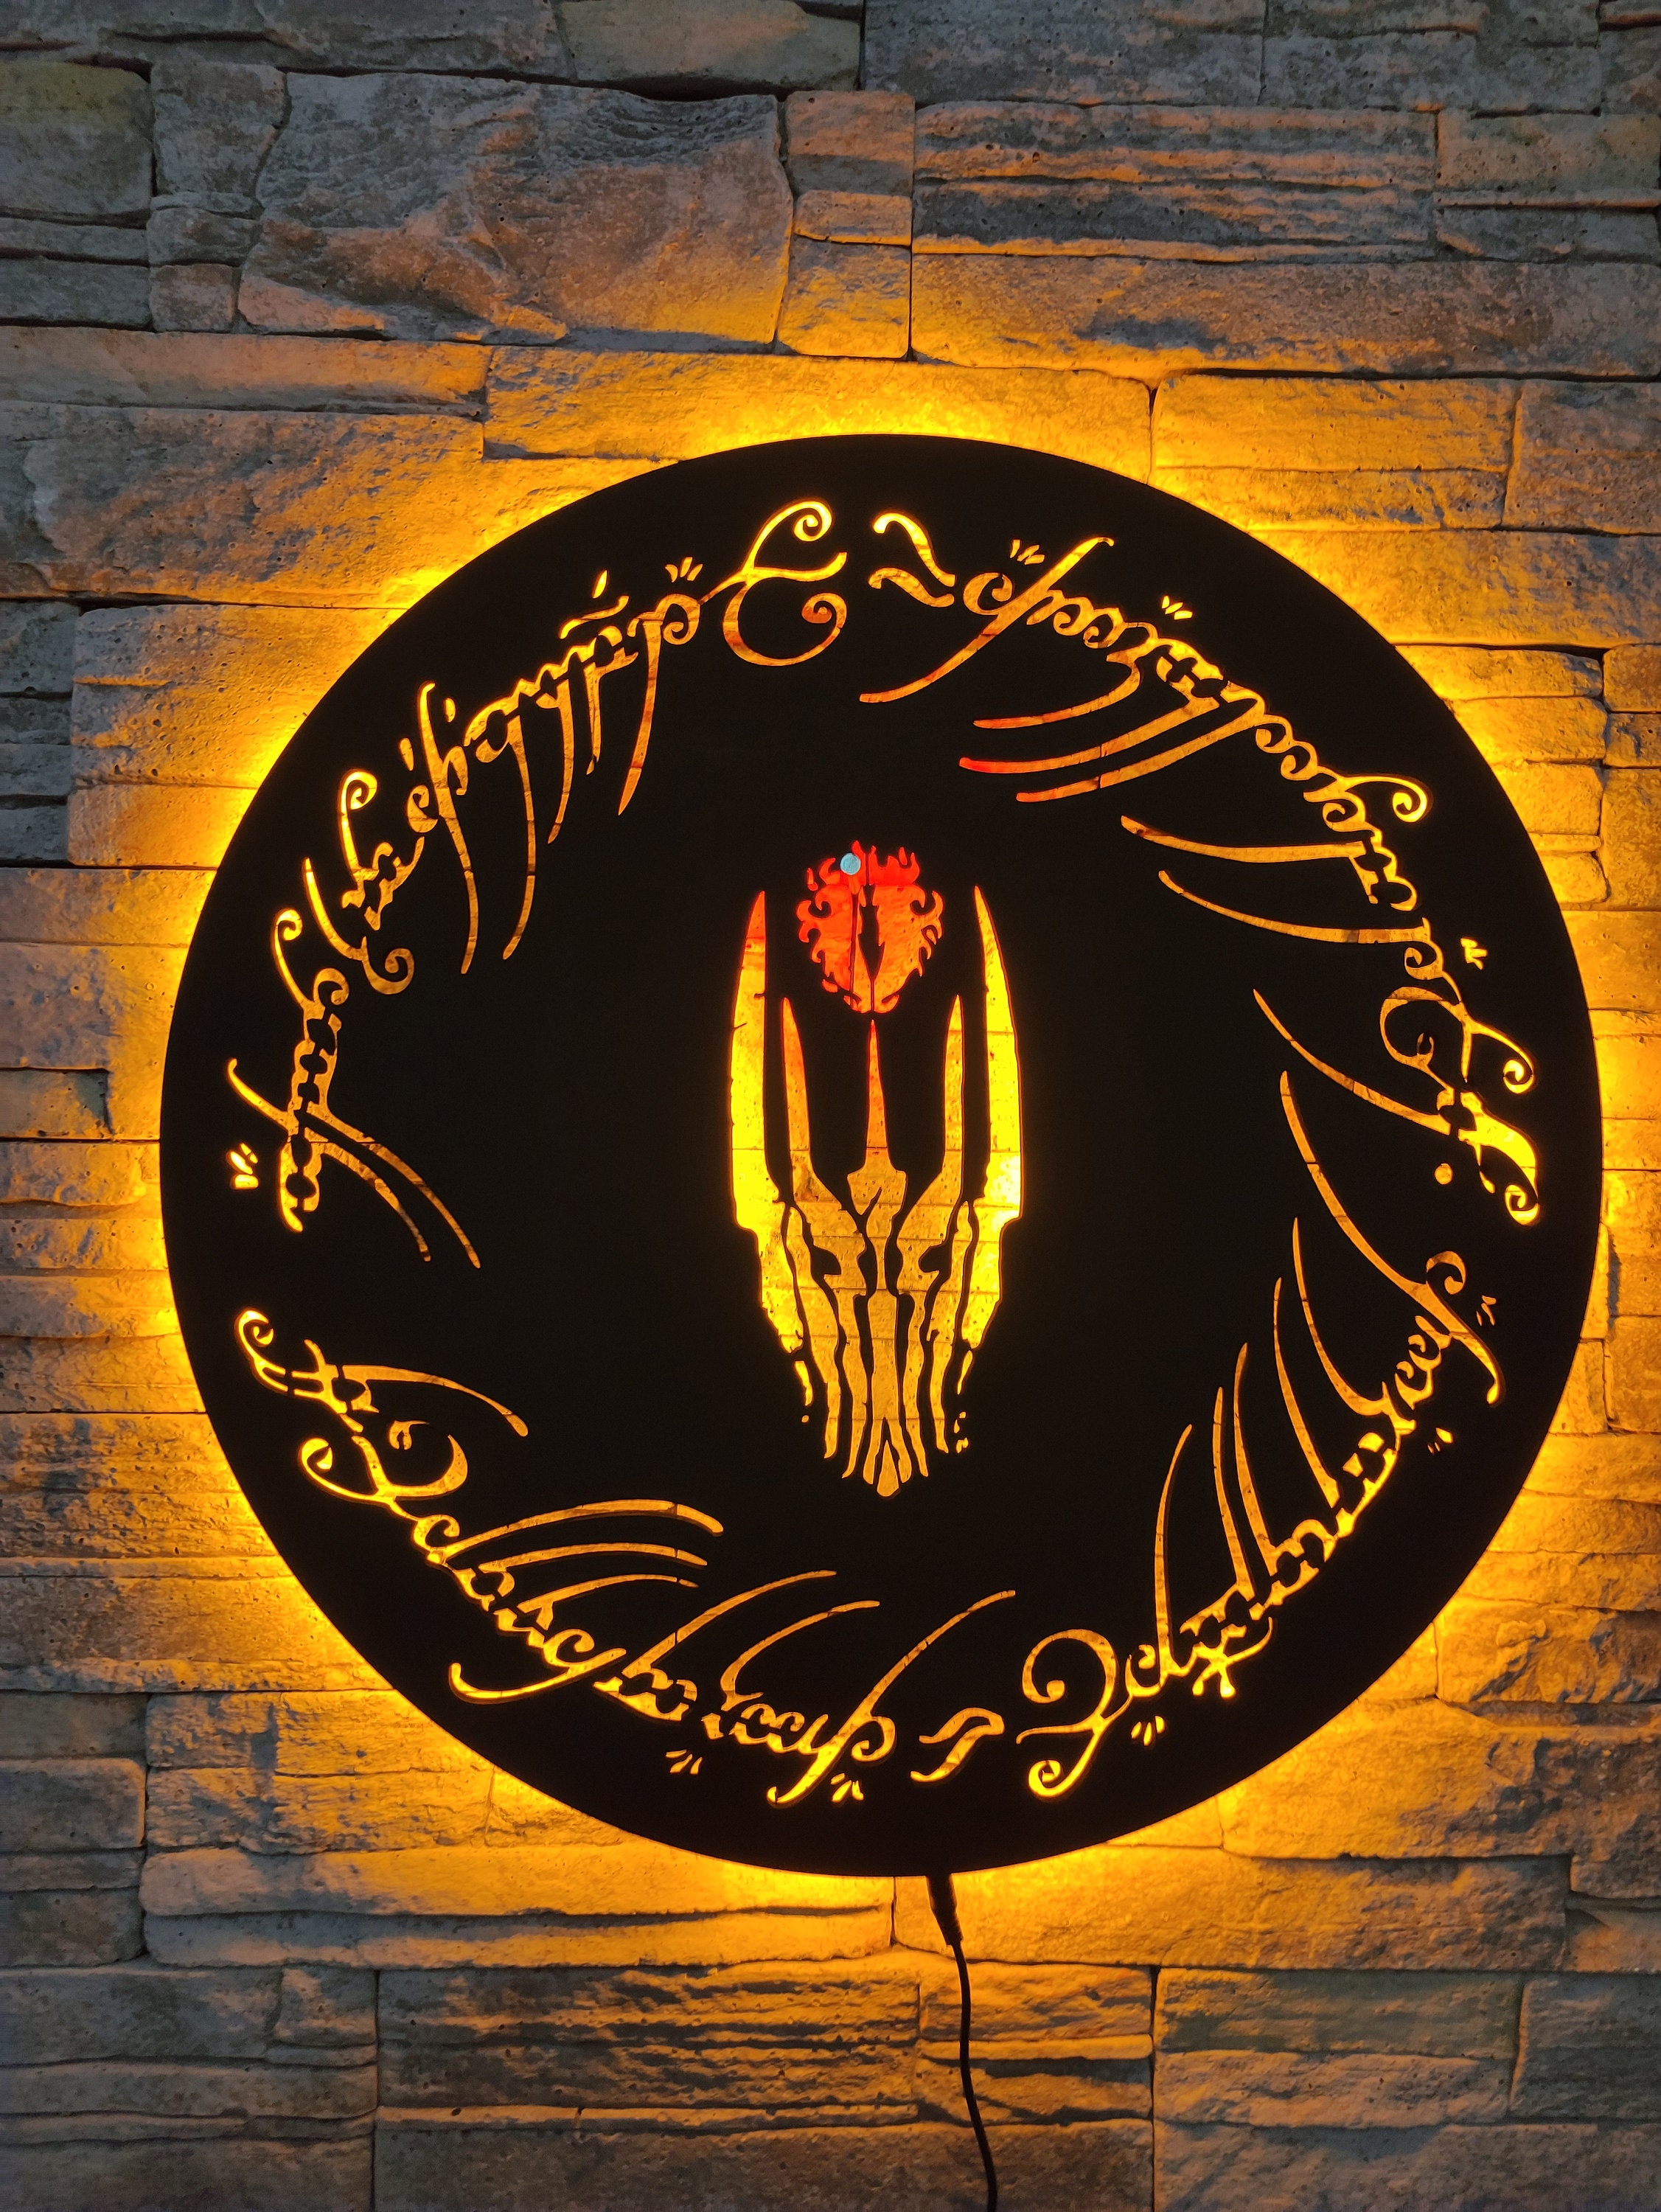 Lord of the Rings: Two Towers: Eye of Sauron light up Pendant Applause, NEW